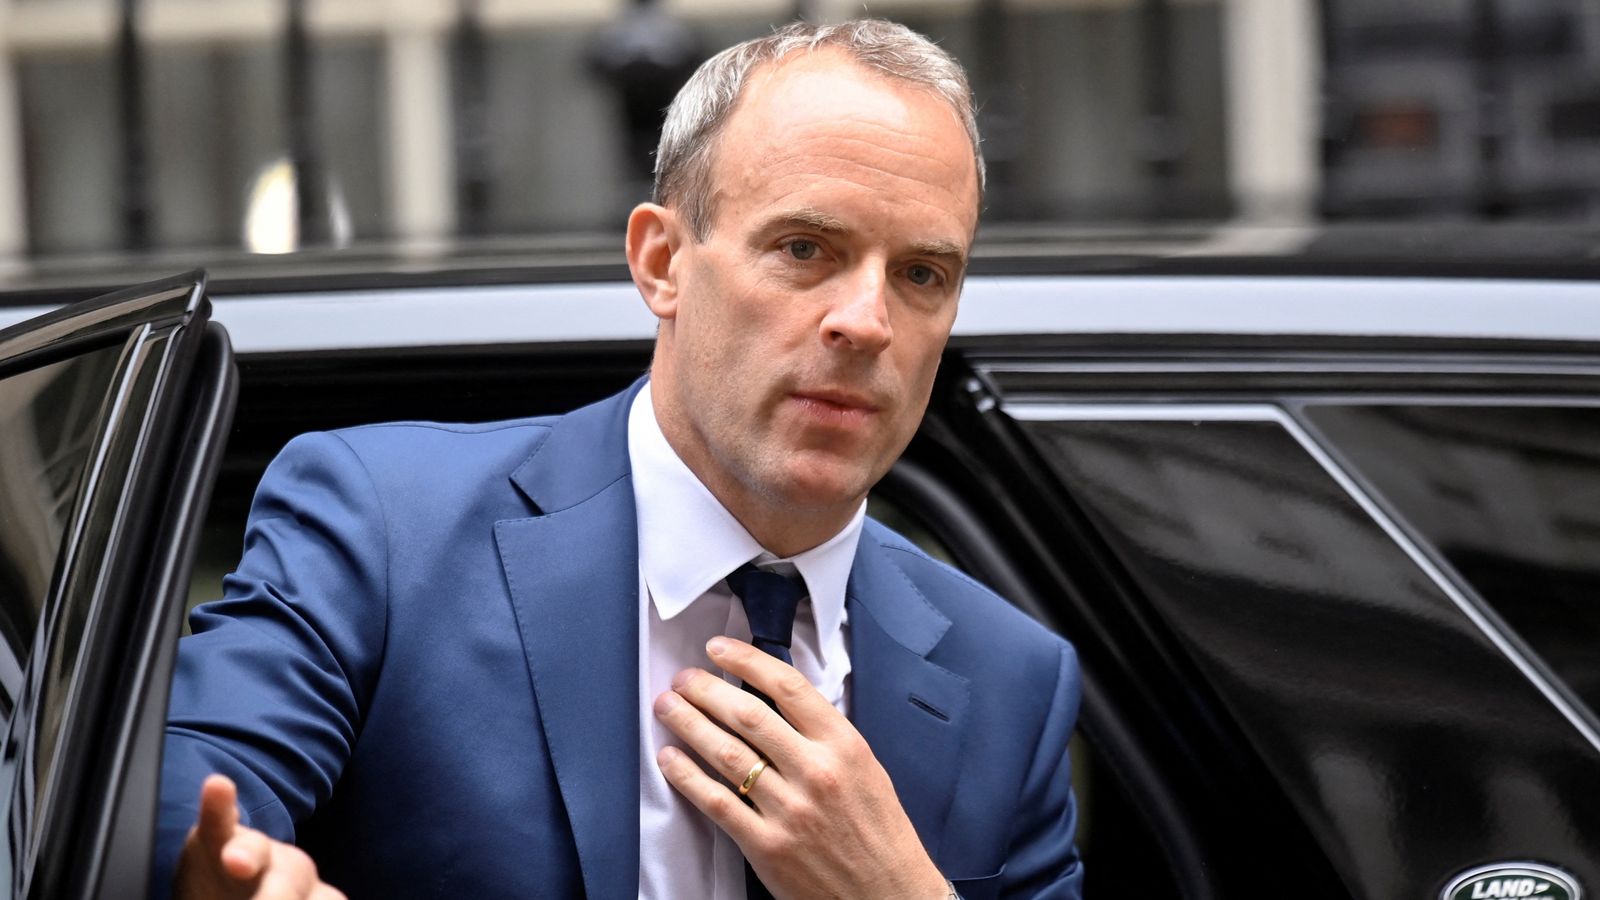 Dominic Raab 'values' civil servants, Ministry of Justice insists amid bullying claims